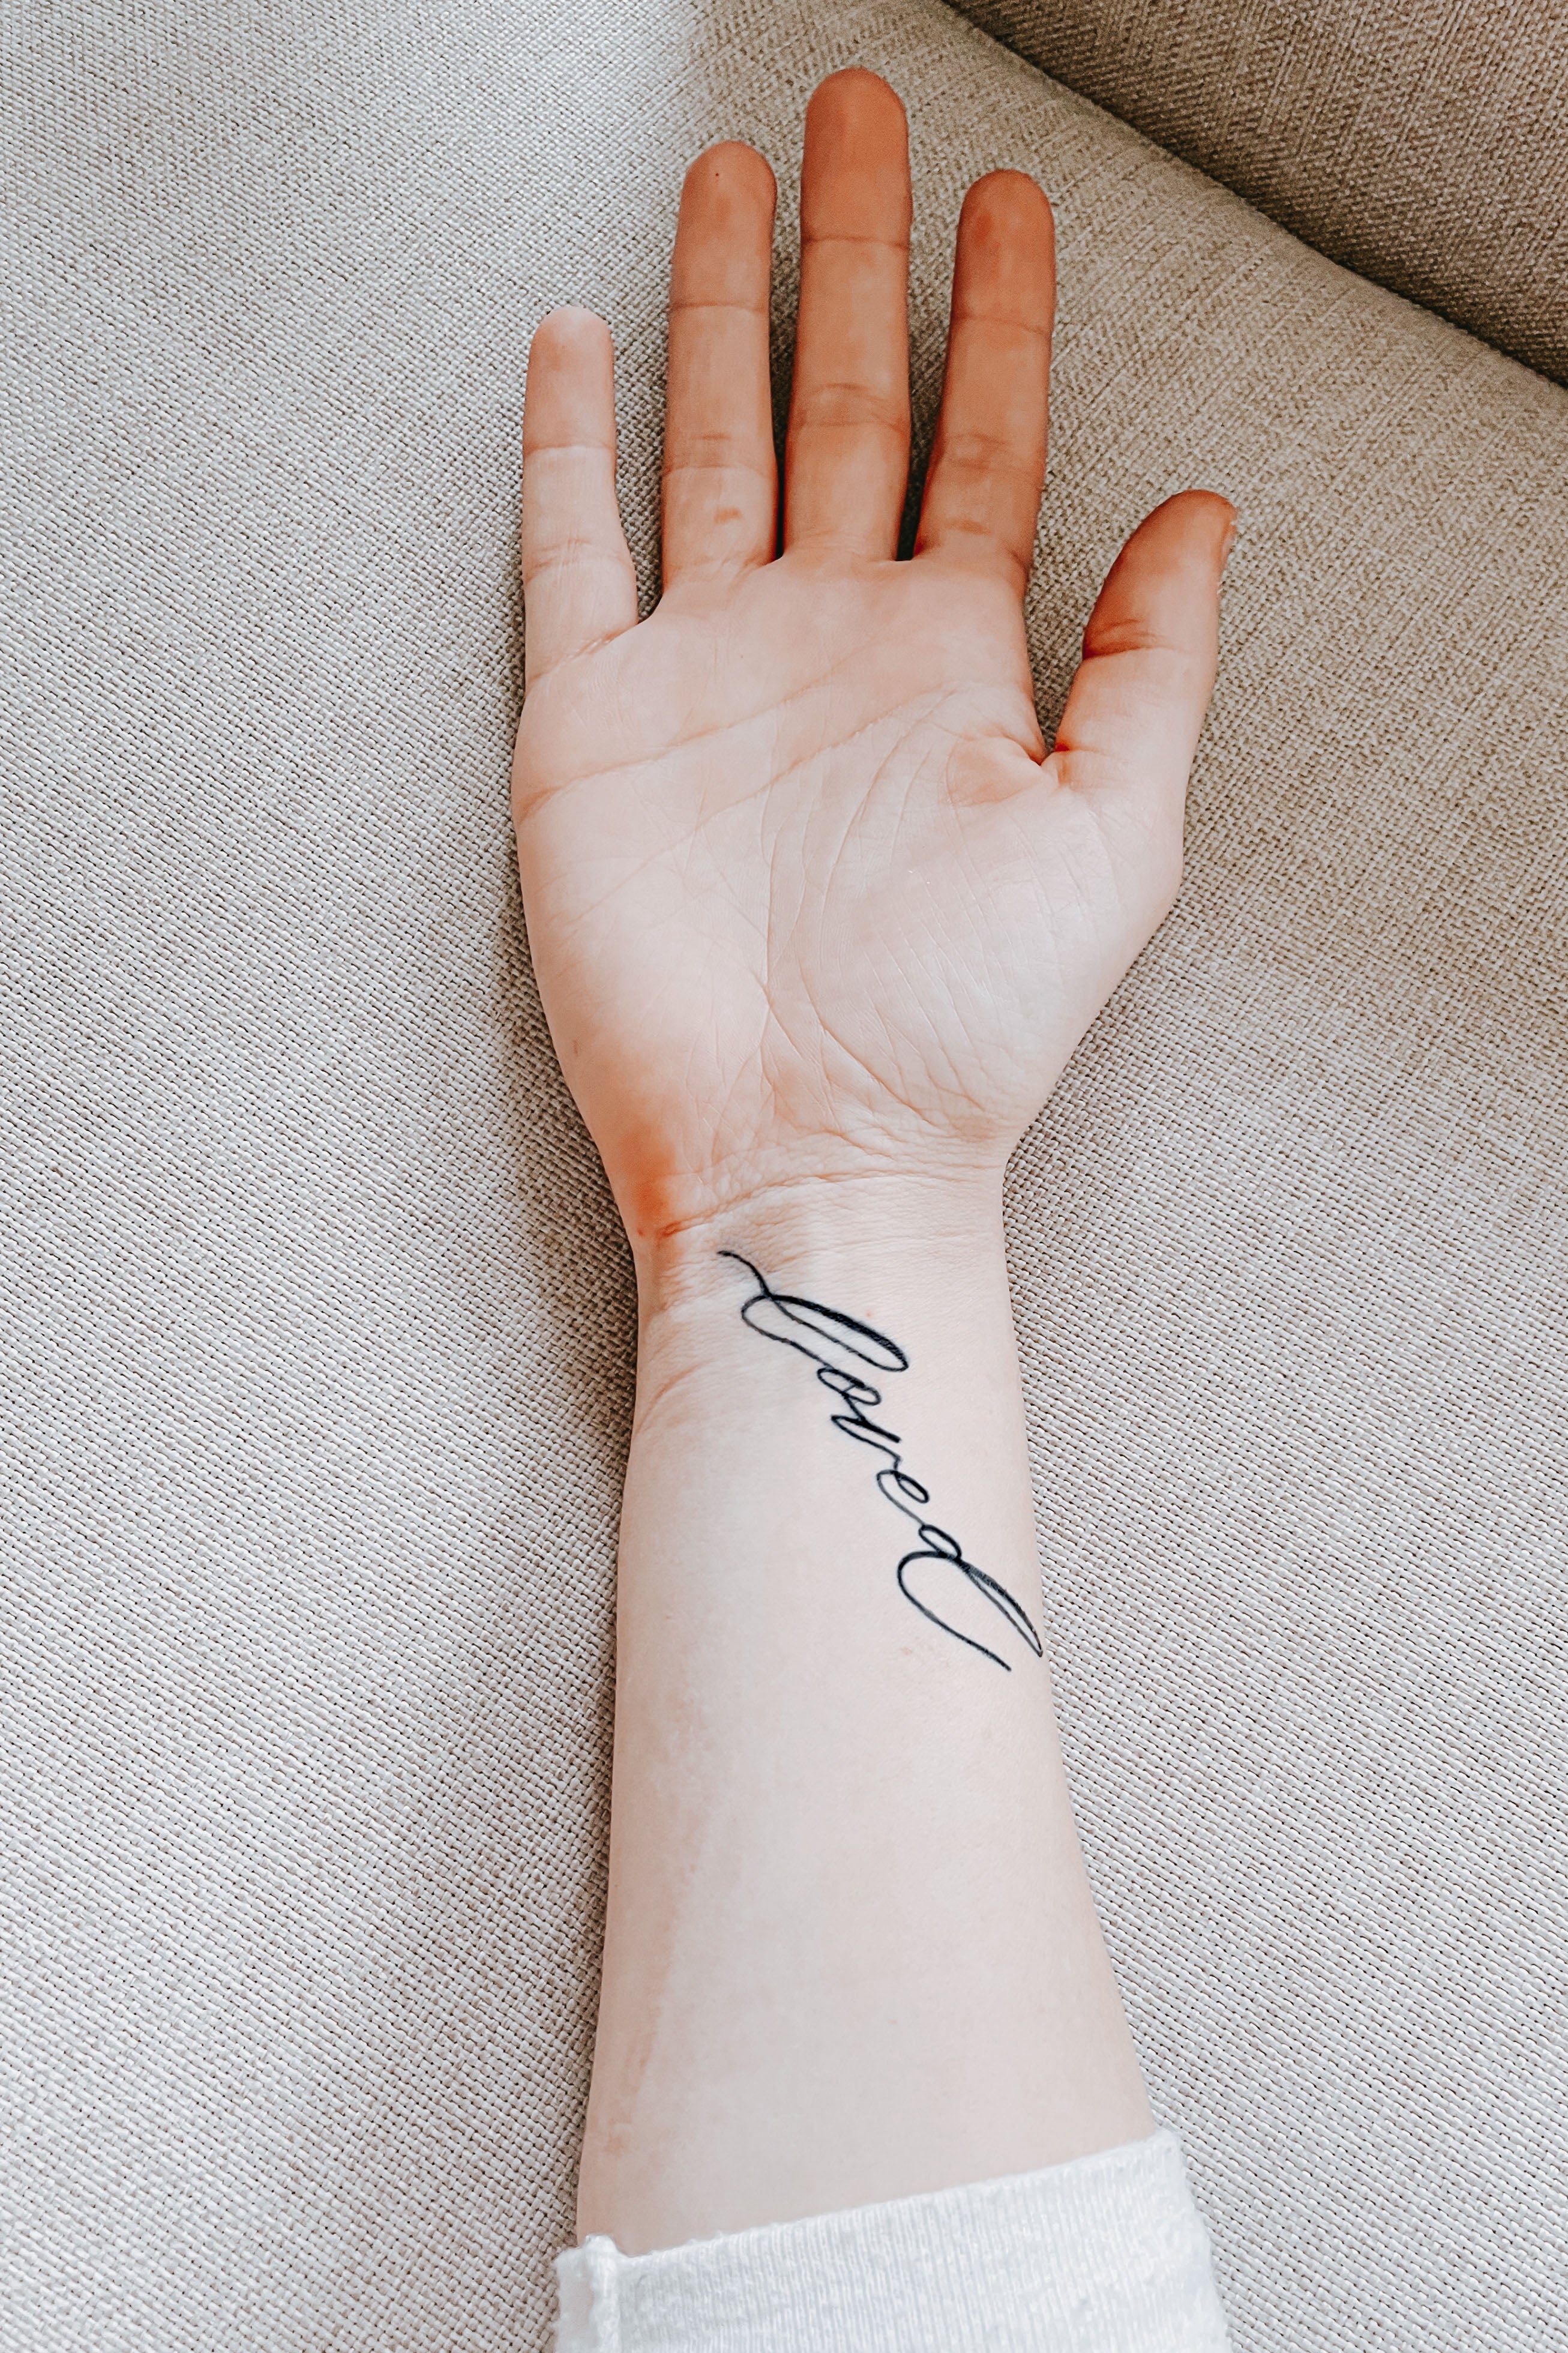 Loved Calligraphy Tattoo – Written Word Calligraphy and Design